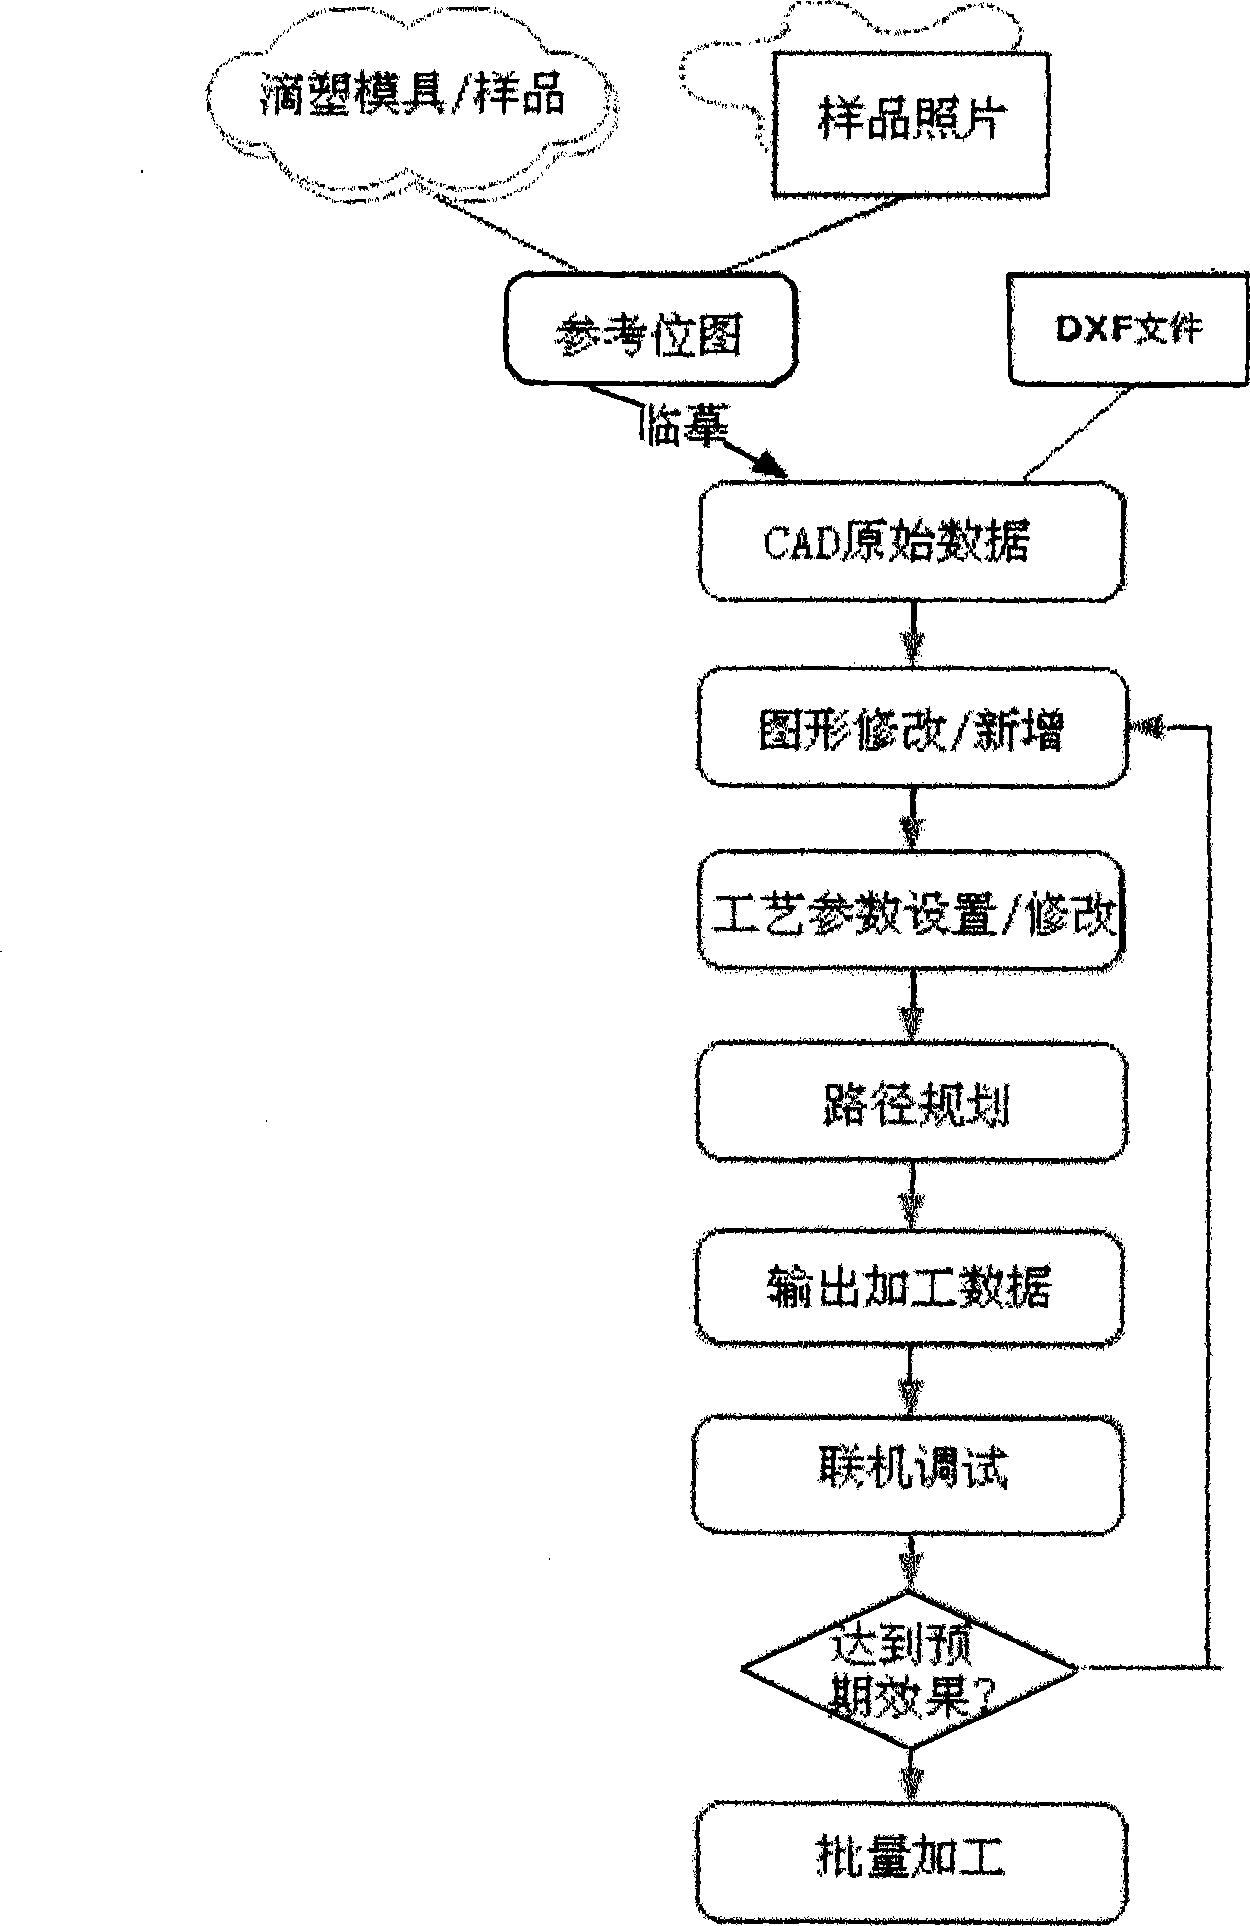 Automatic drip model method of microcomputer combining with digital control drip model machine